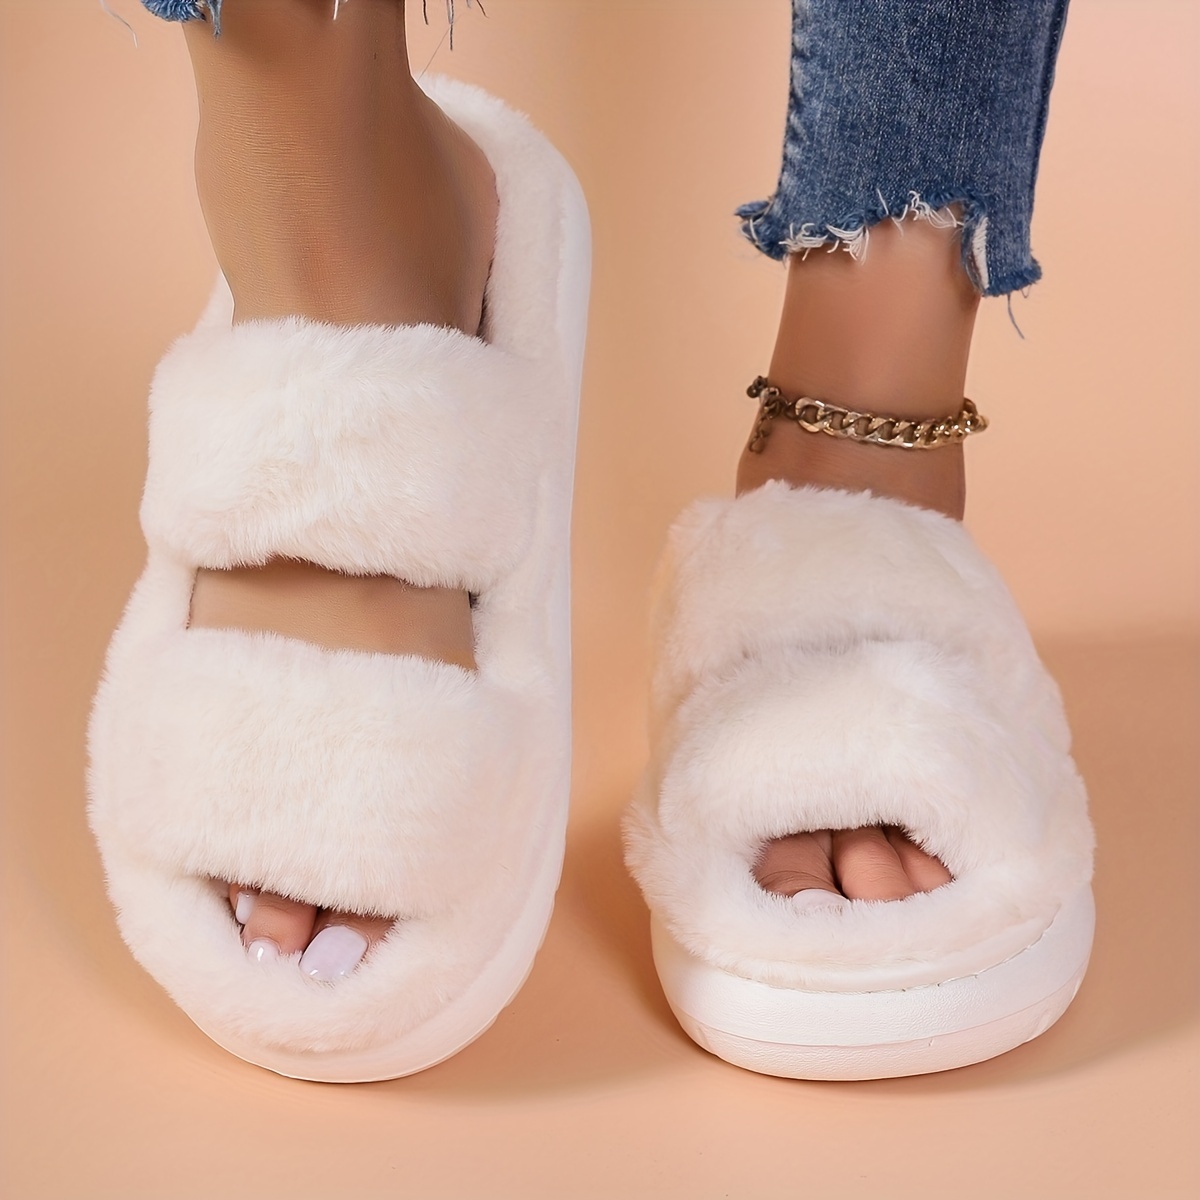 Women's Fluffy Slippers, Warm & Comfy Open Toe Shoes, Solid